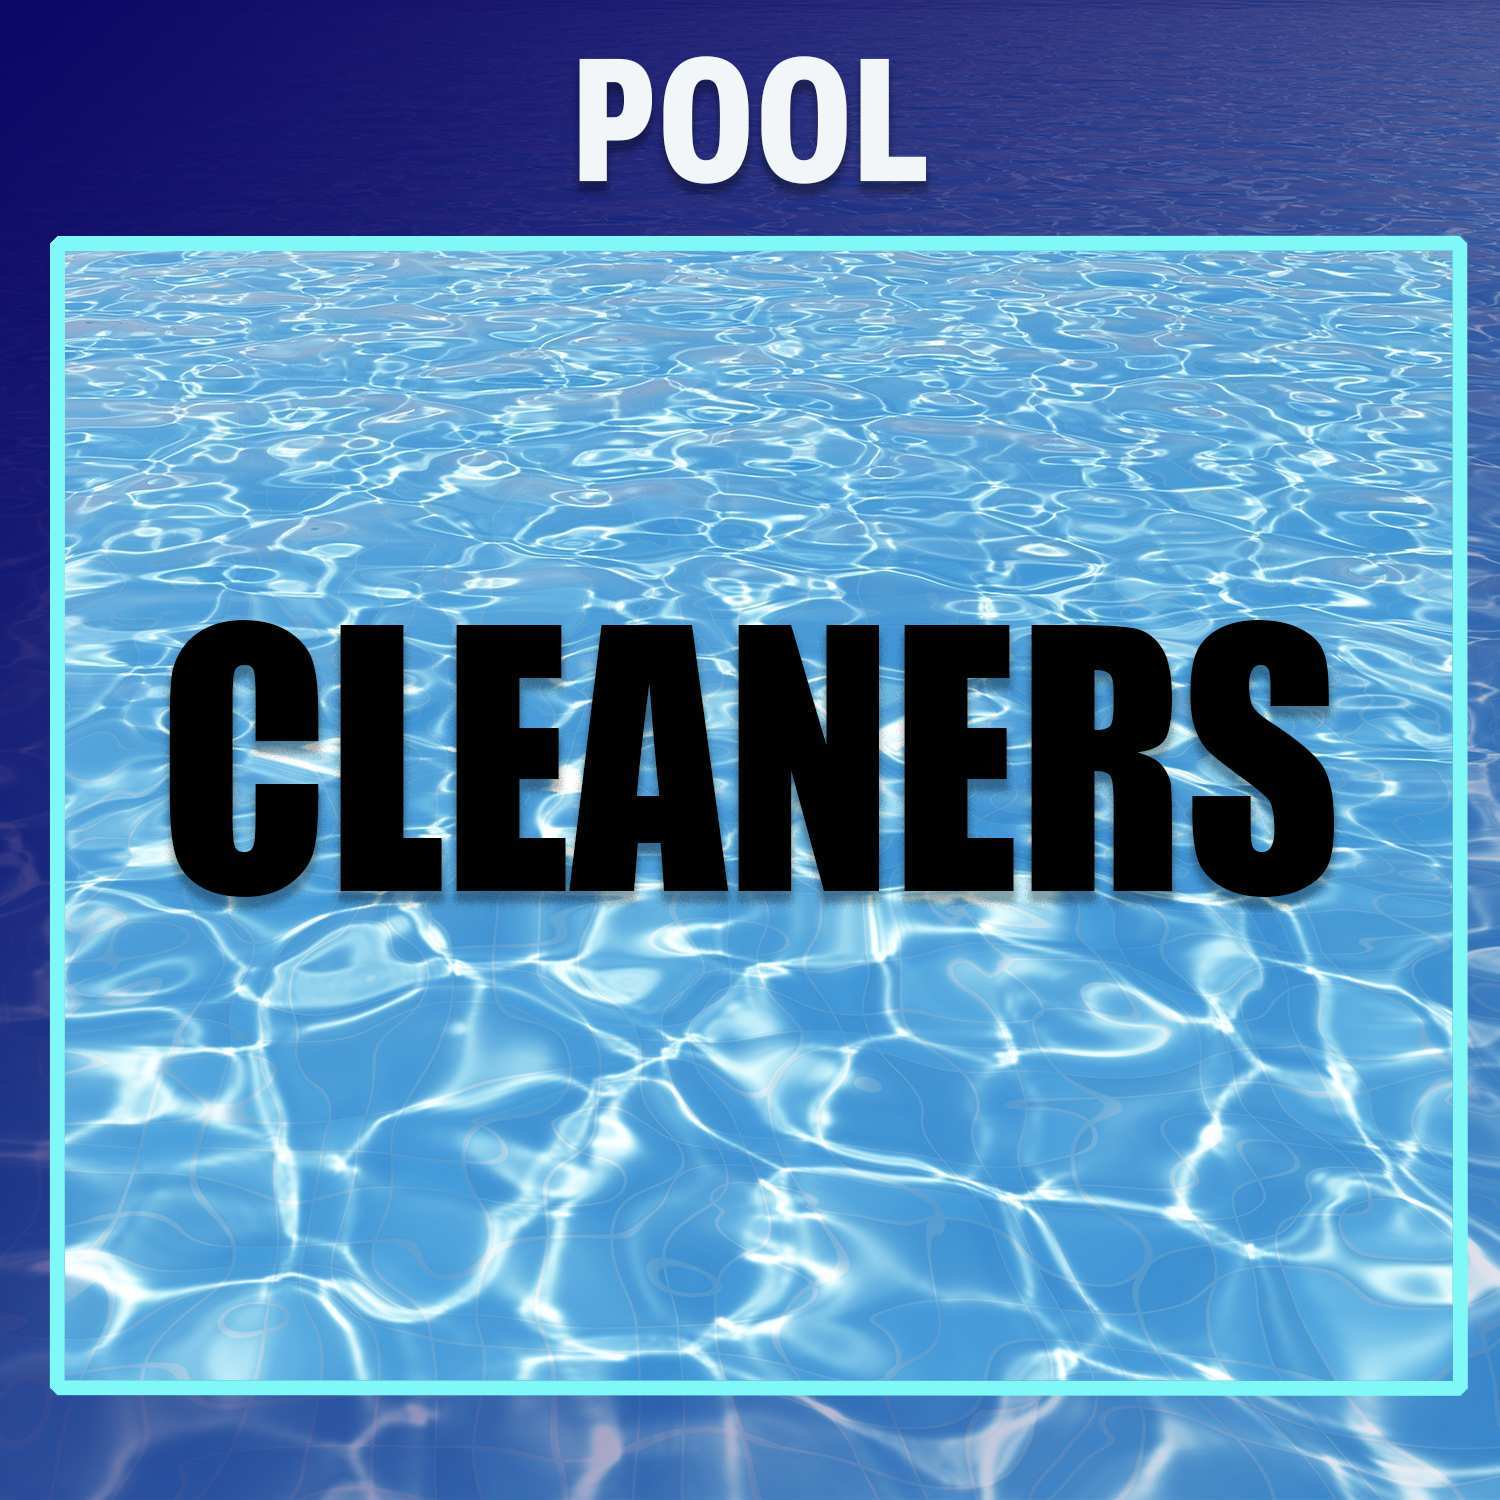 Pool Cleaners